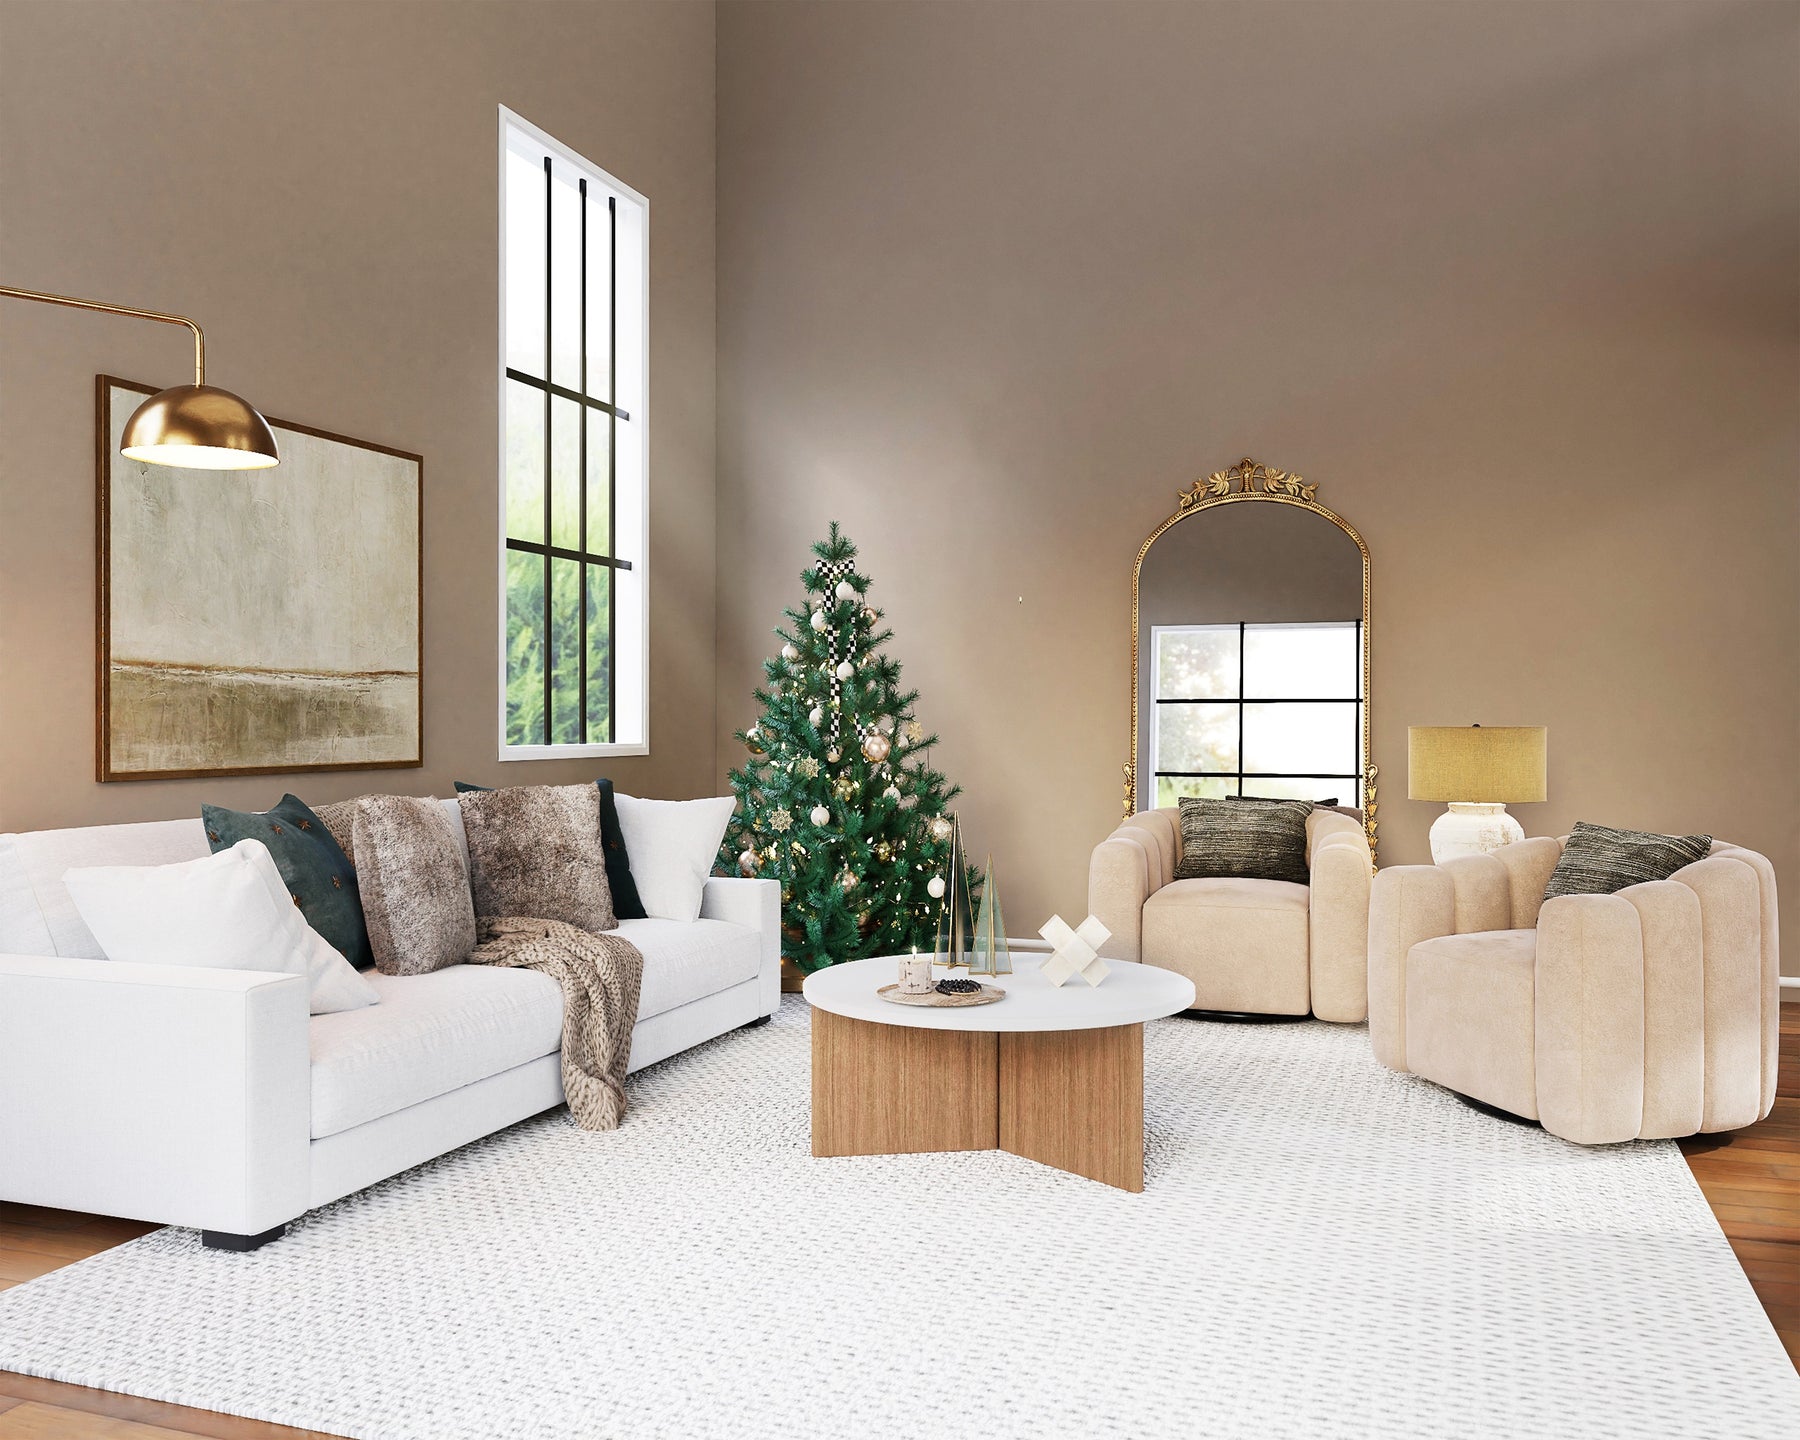 Create a Festive Home with Our Easy-to-Follow Holiday Prep Guide